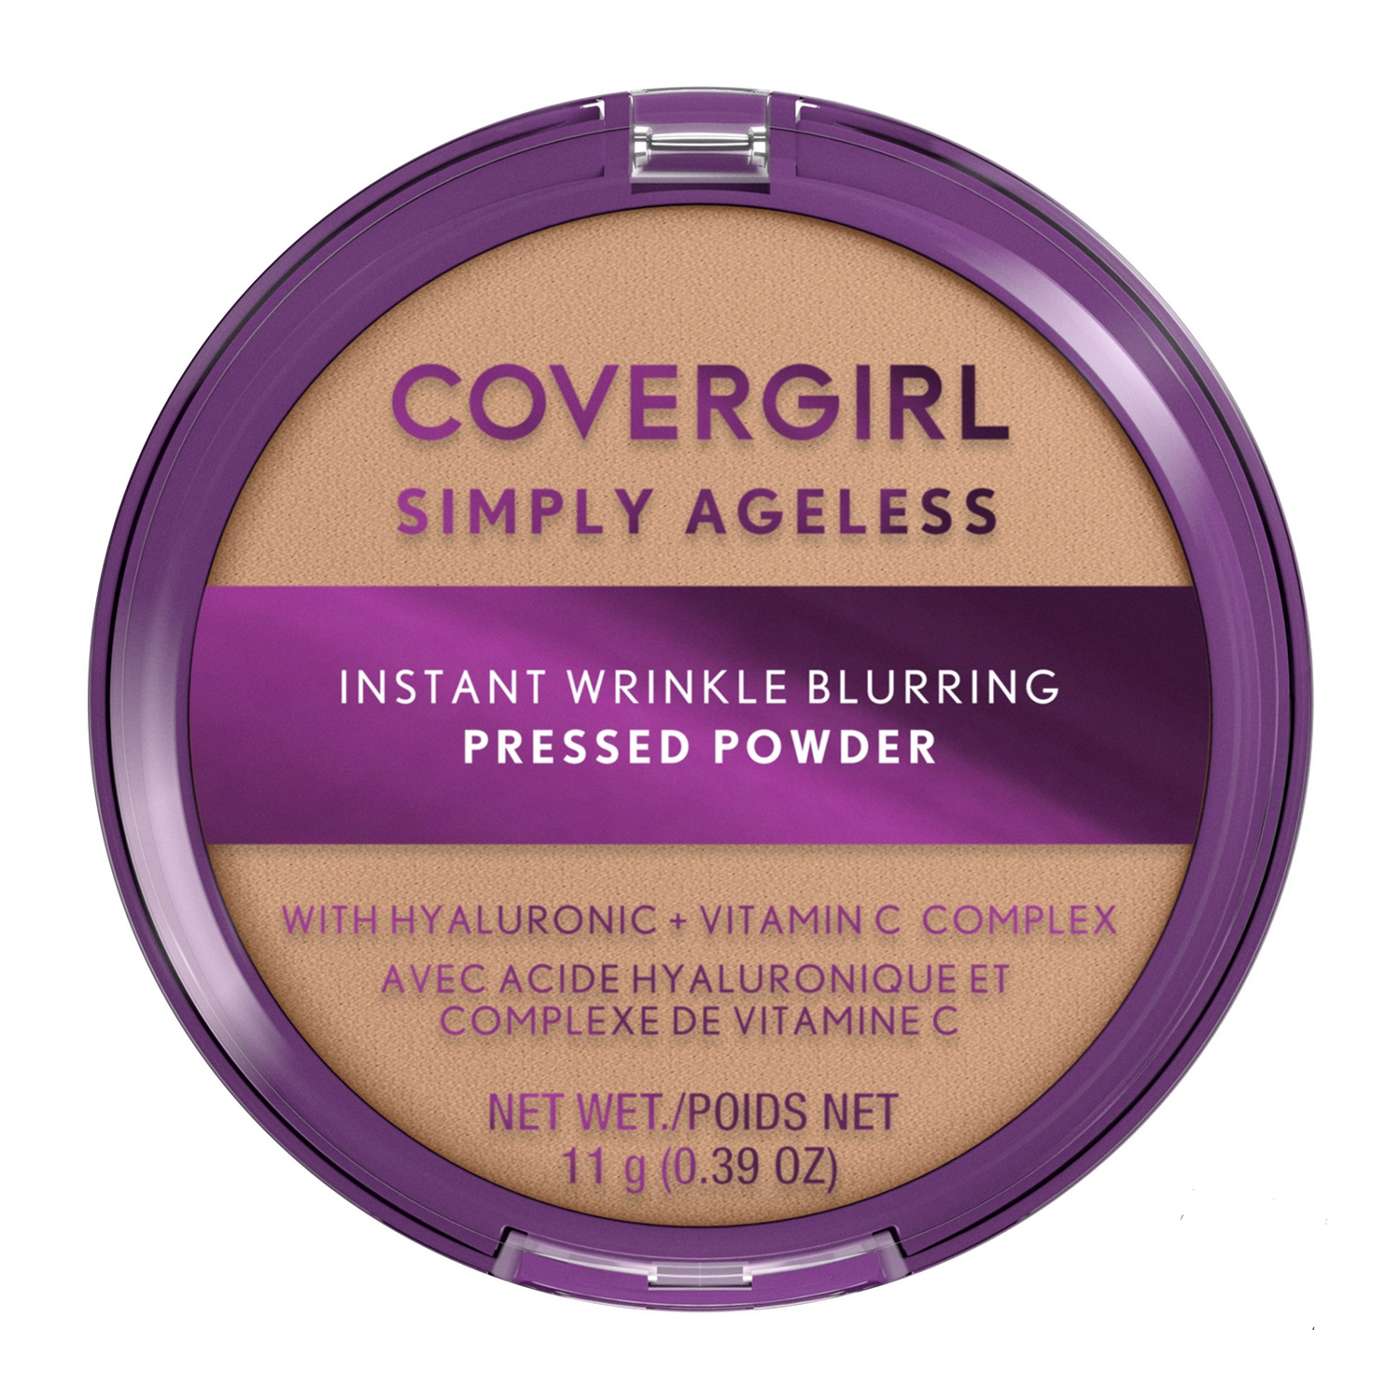 Covergirl Simply Ageless Pressed Powder 225 Buff Beige; image 1 of 13